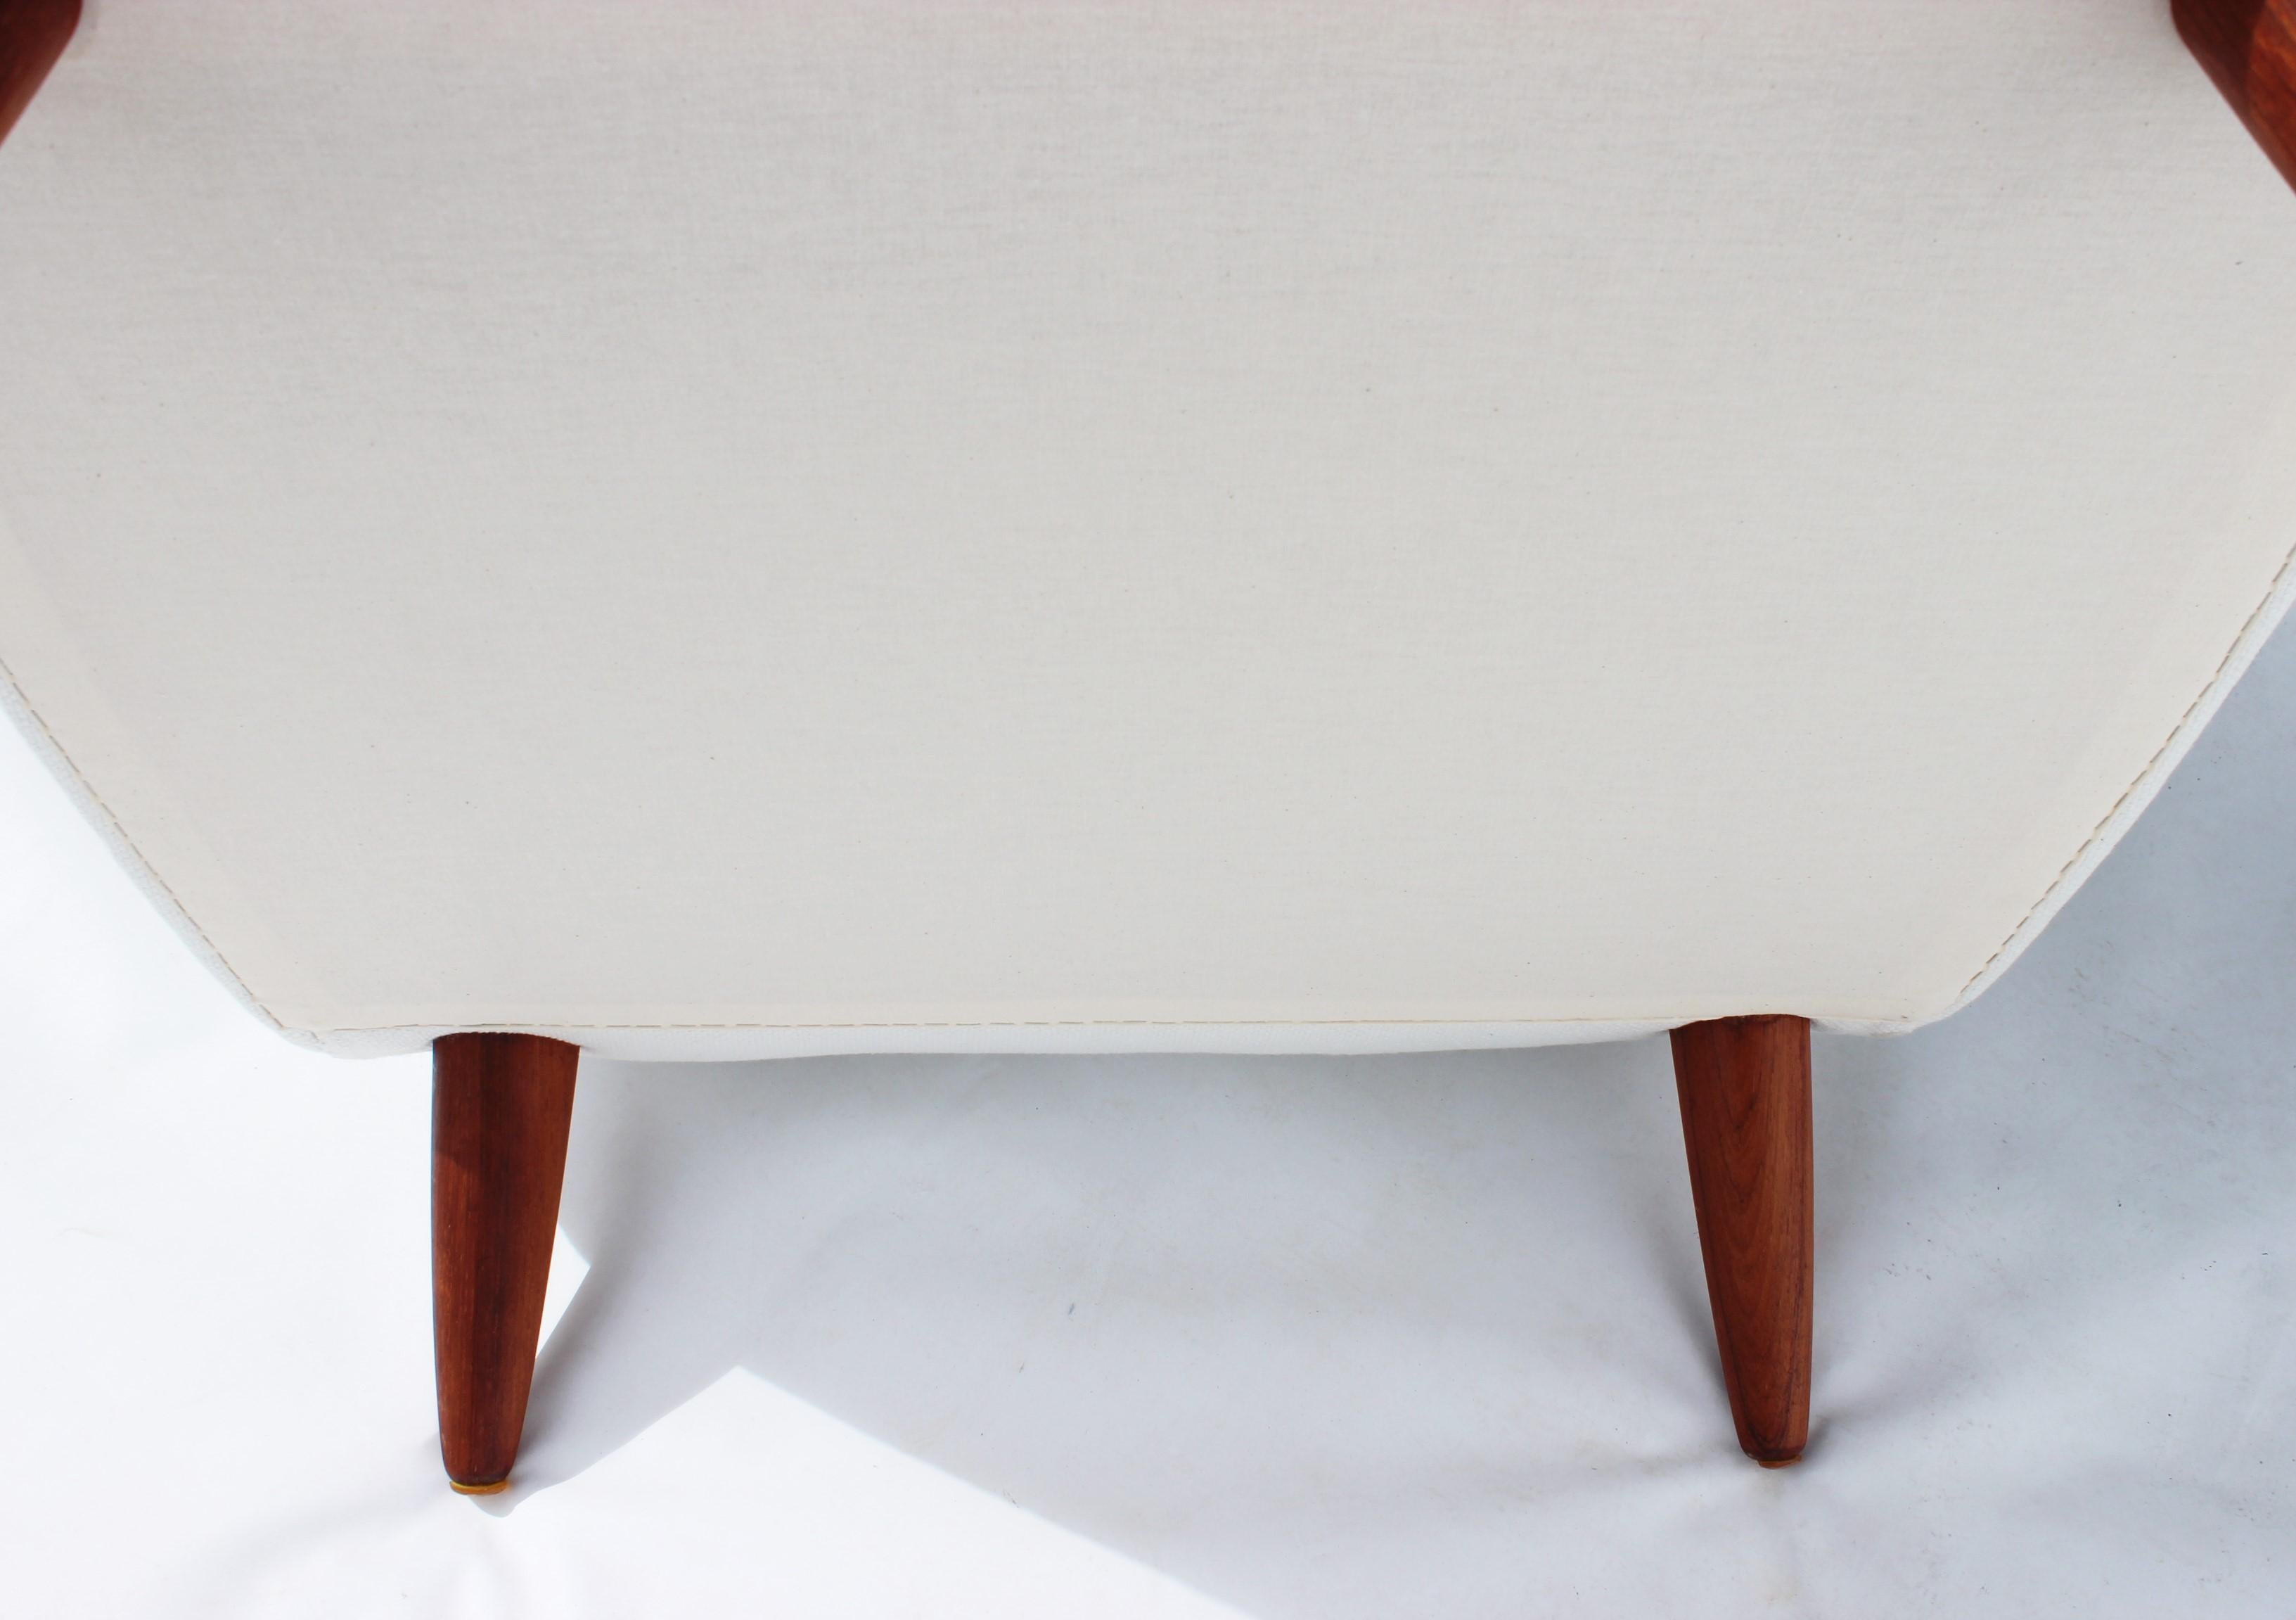 Wool Easy Chair with Low Back Upholstered in White Fabric, Danish Design, 1960s For Sale